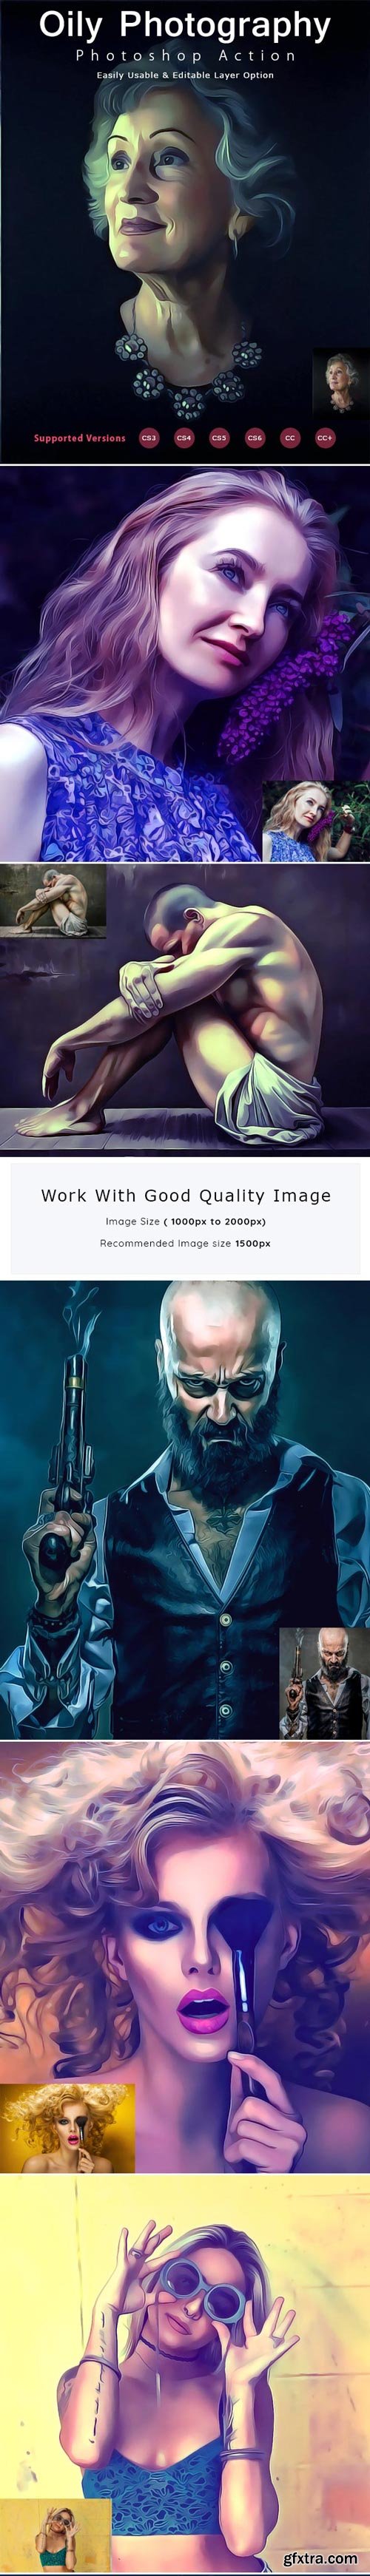 GraphicRiver - Oily Photography Action - 19880740